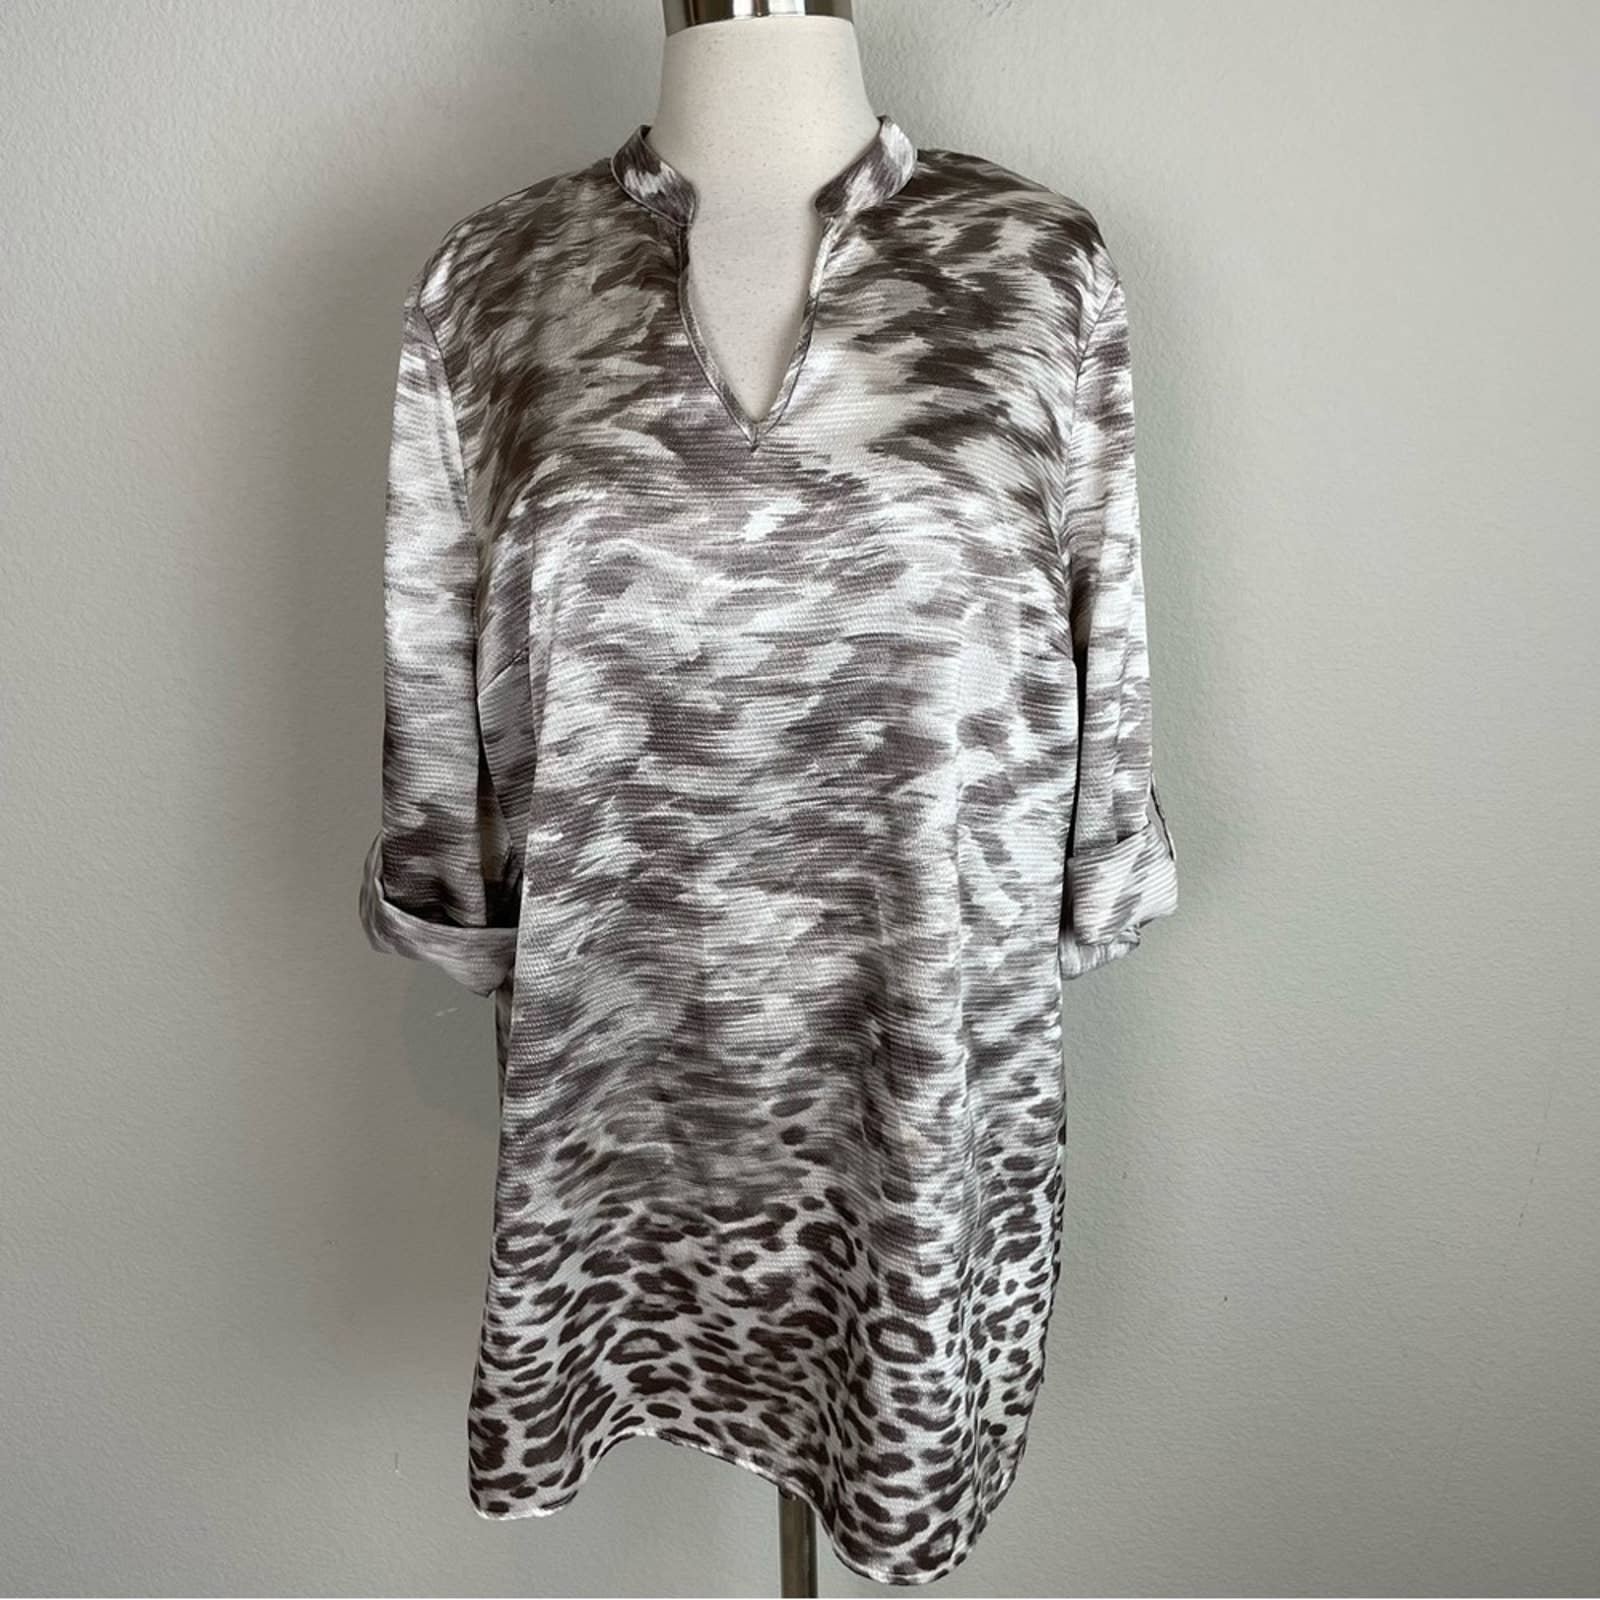 the Lowest price Chico´s Travelers Brown Tan Animal Print 3/4 Sleeve Tunic Top 2 KbCtiQNNB Hot Sale